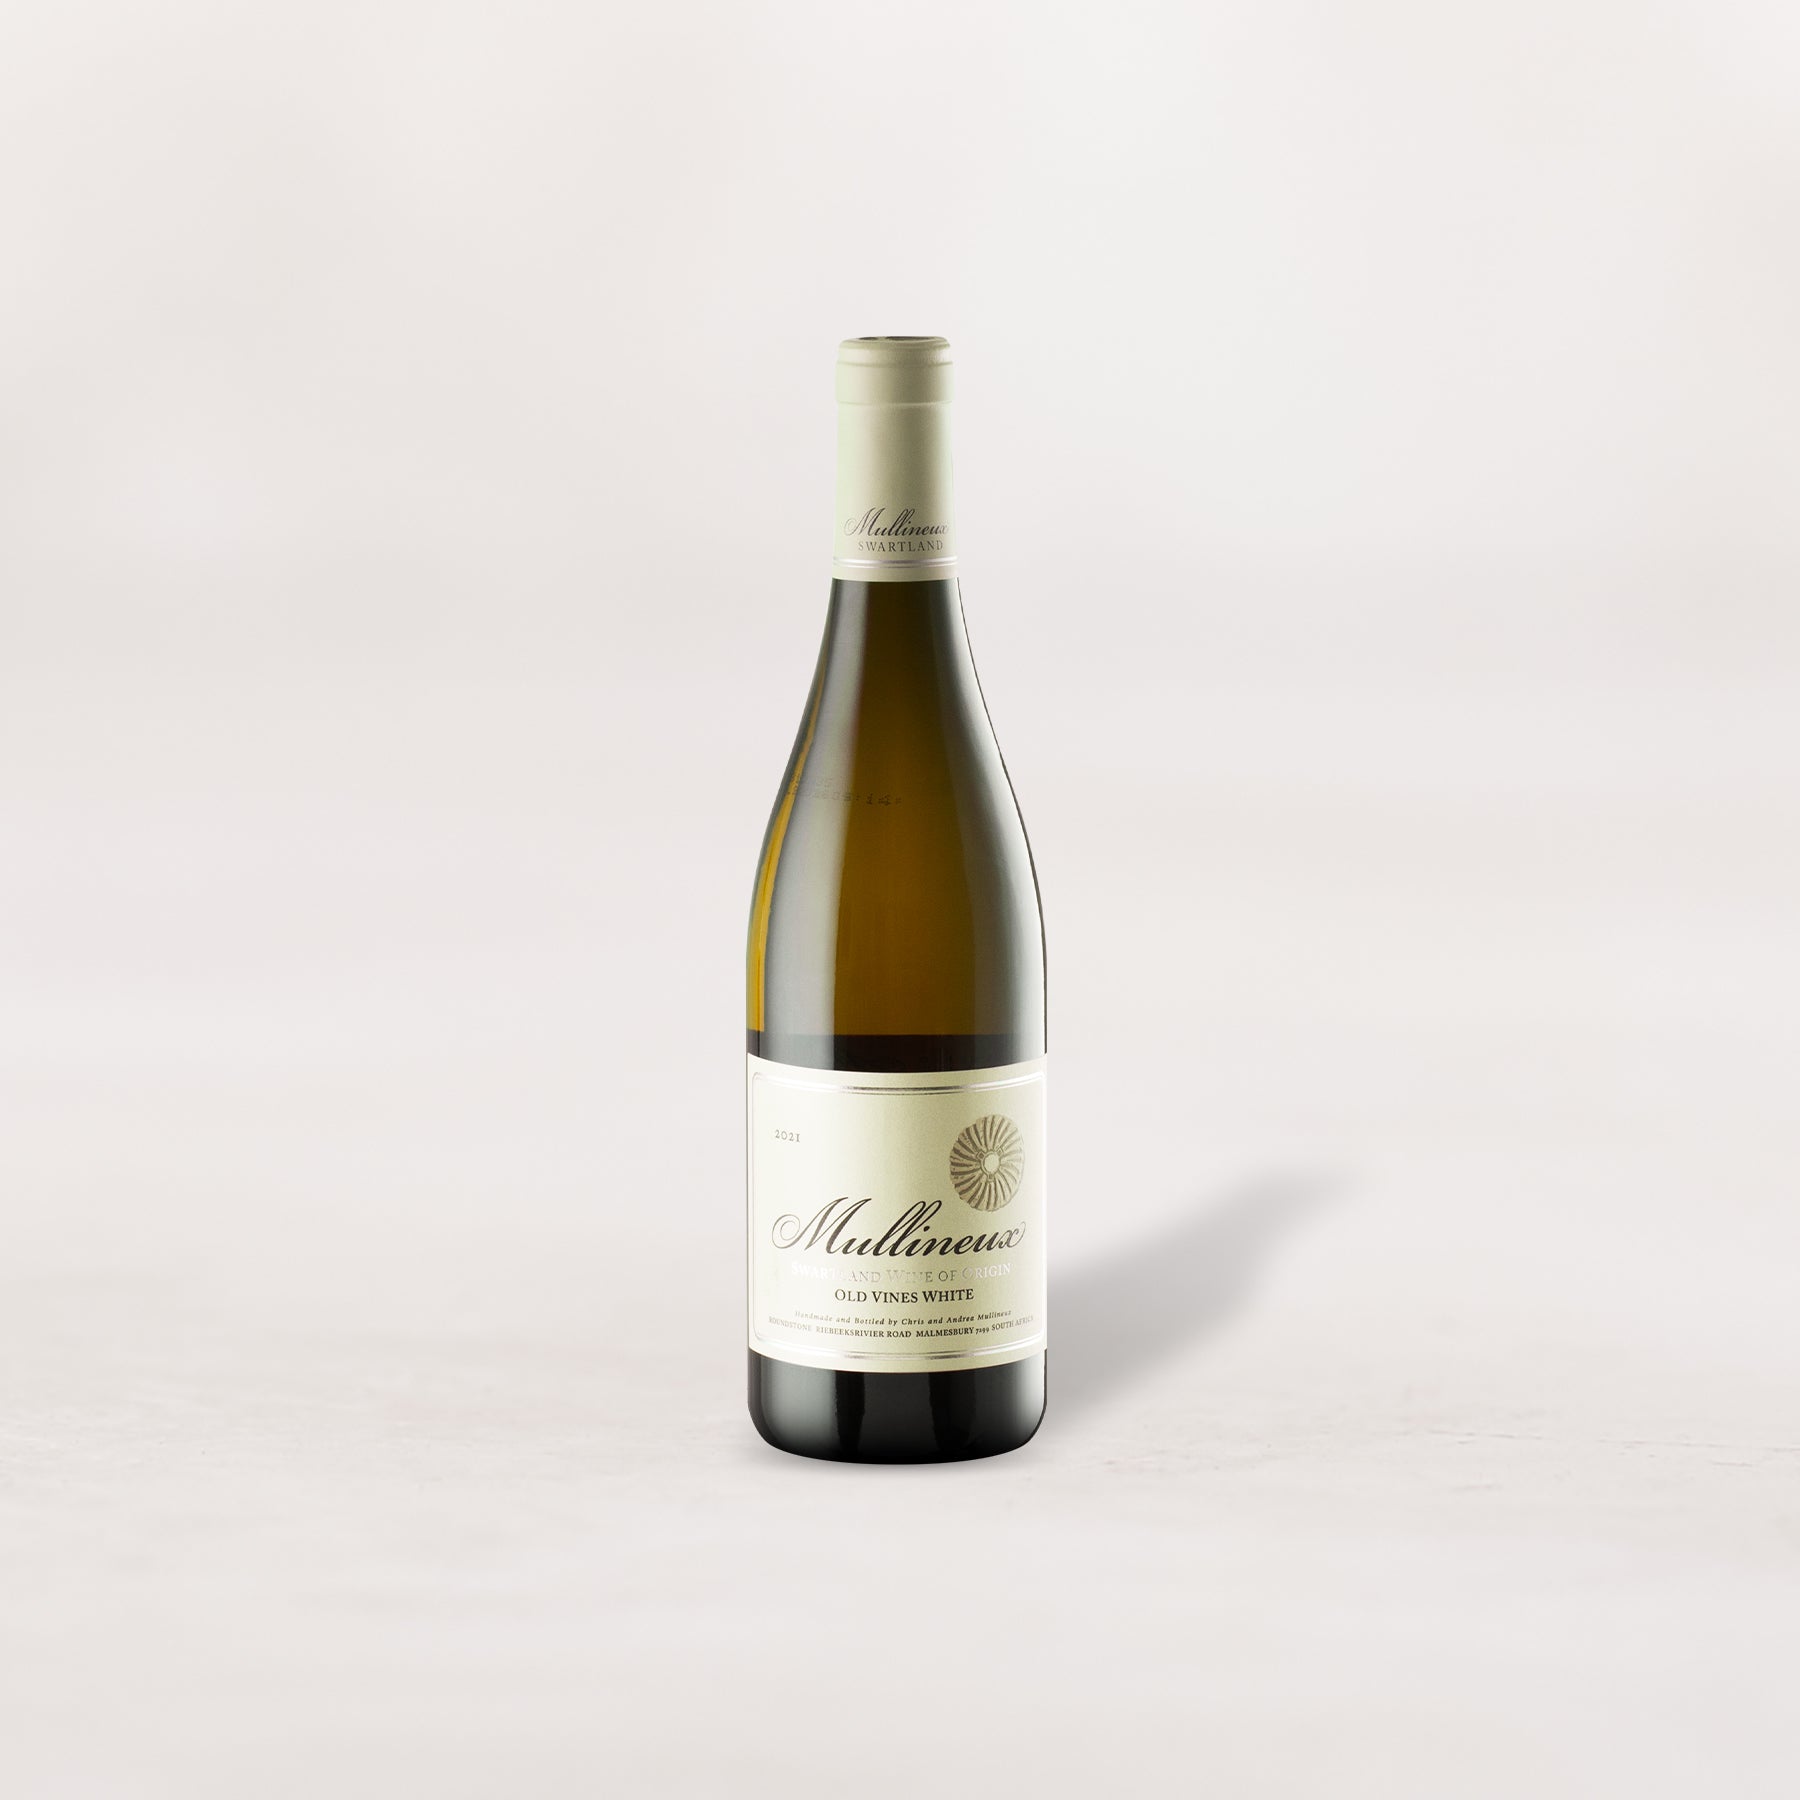 Mullineux Family Wines, Old Vines White